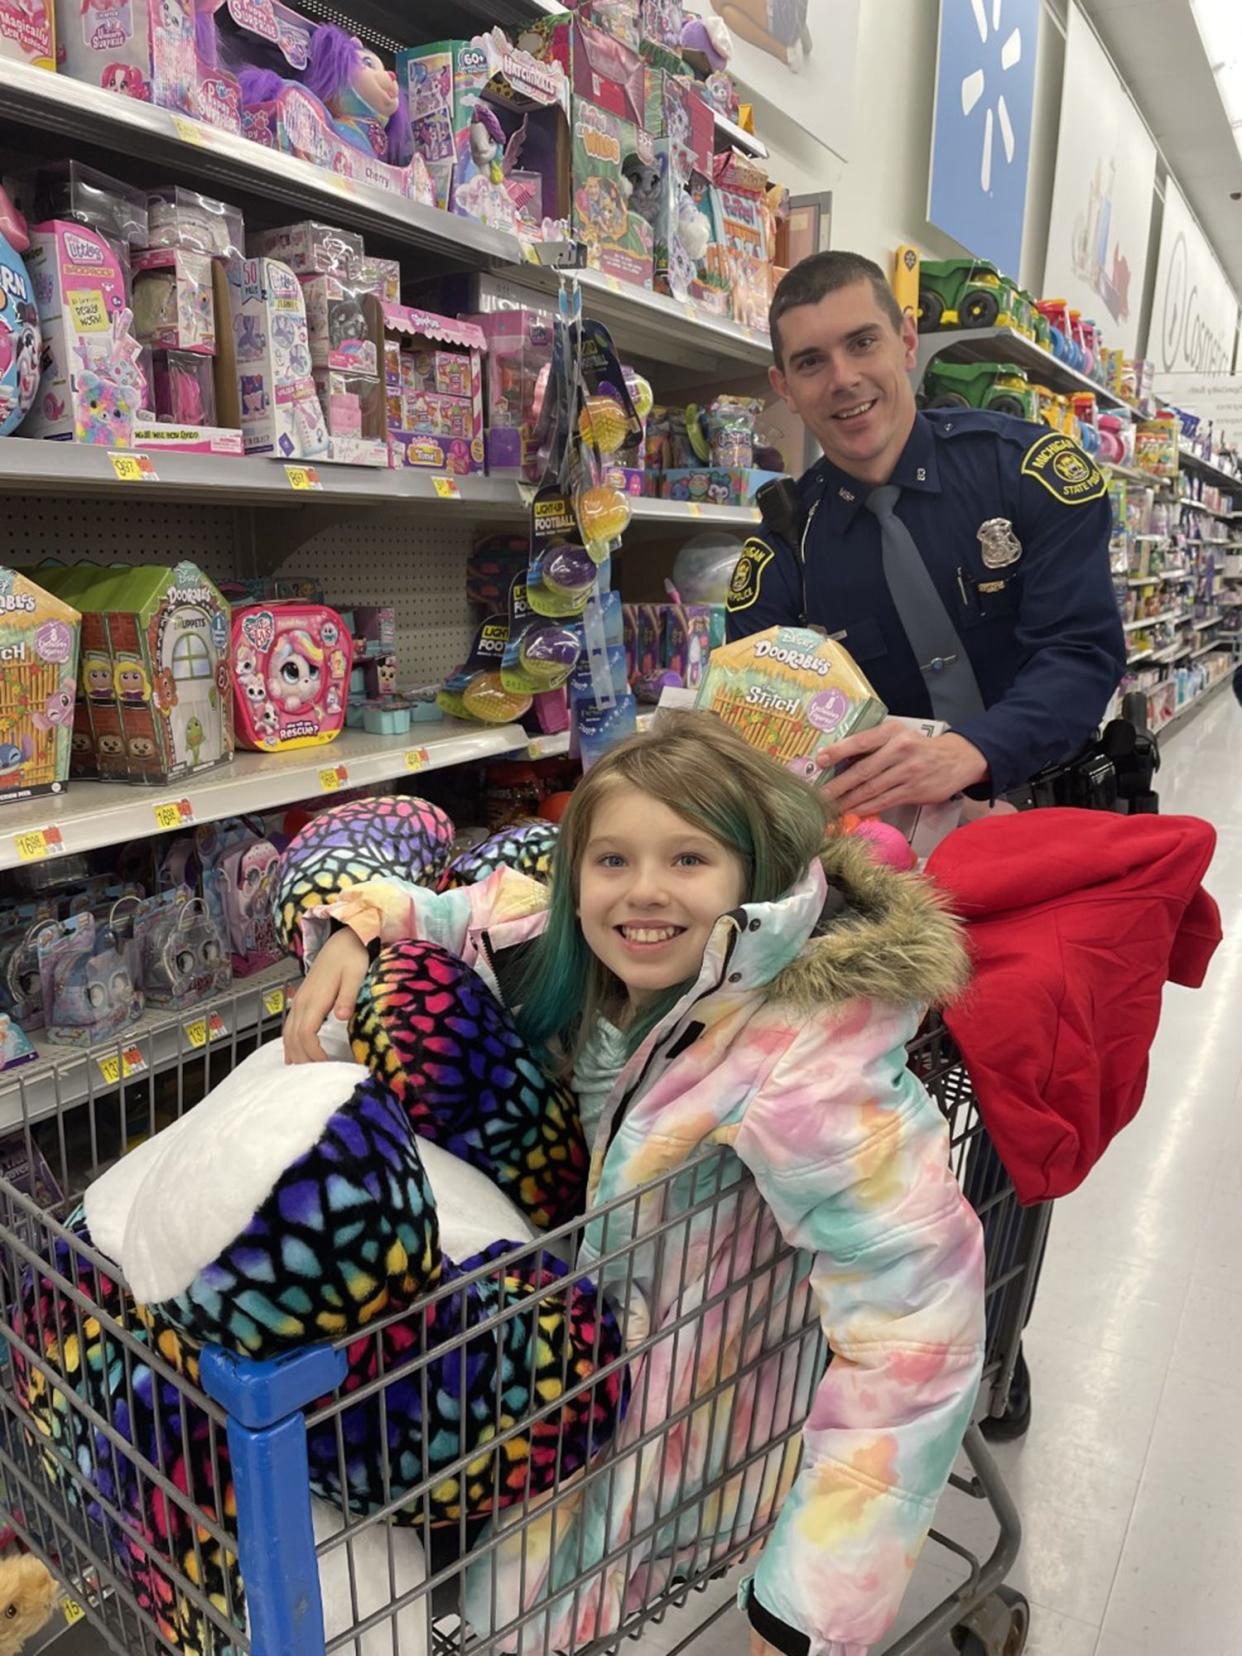 Nine-year-old Summer Lahaie shops with Michigan State Police troopers on Wednesday, Nov. 30 at the Walmart in Cheboygan.